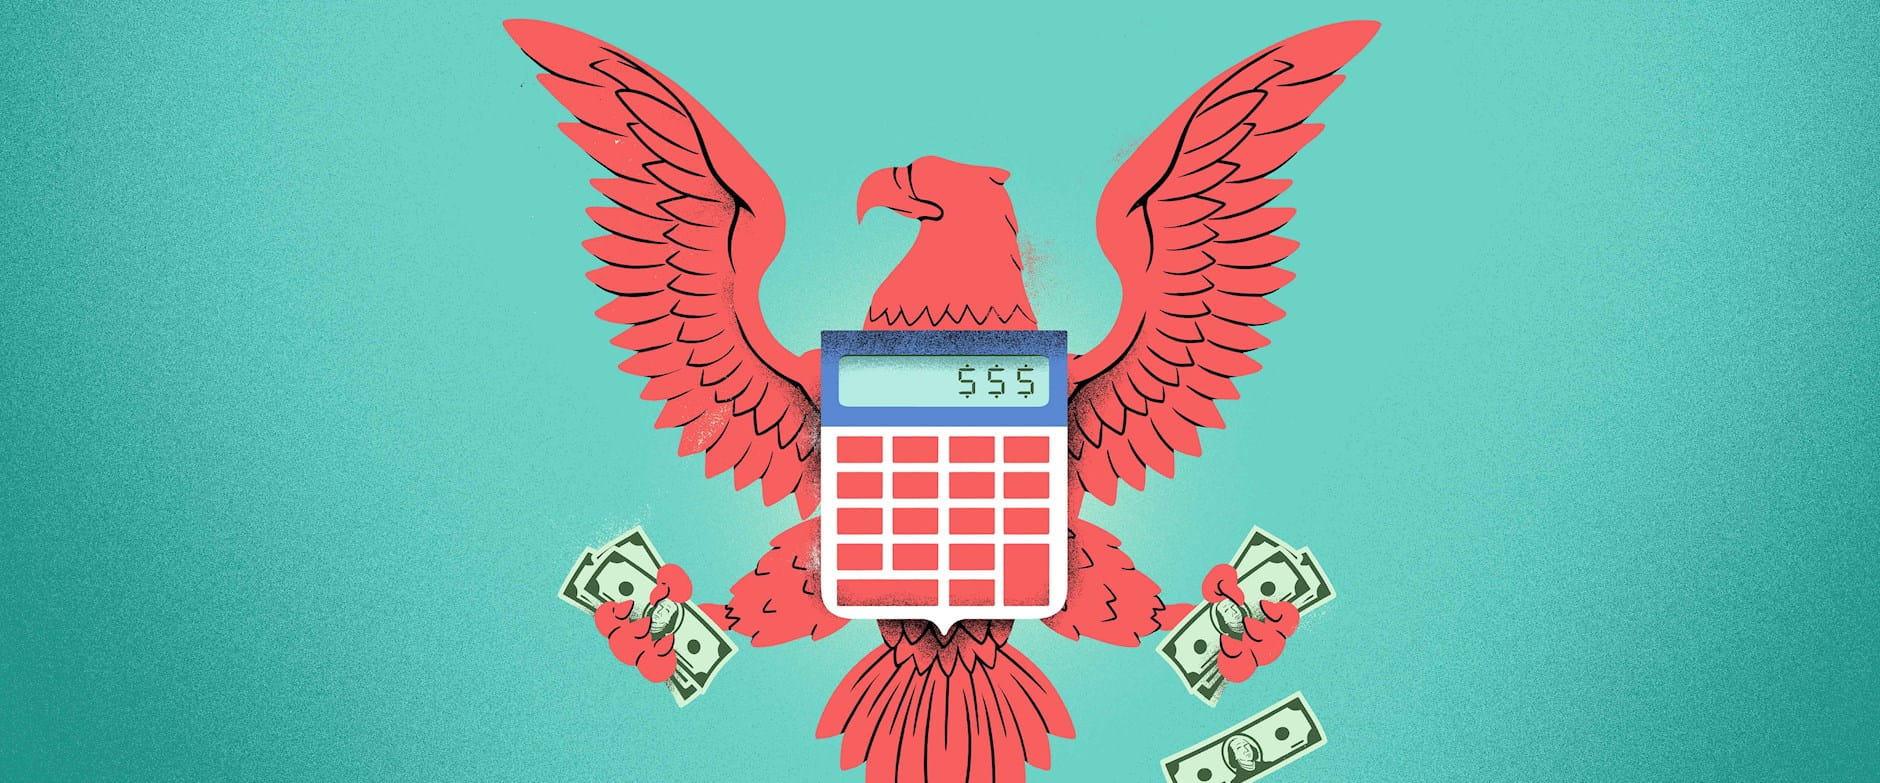 Eagle in the style of the Great Seal of the United States, gripping cash and using a calculator as a shield